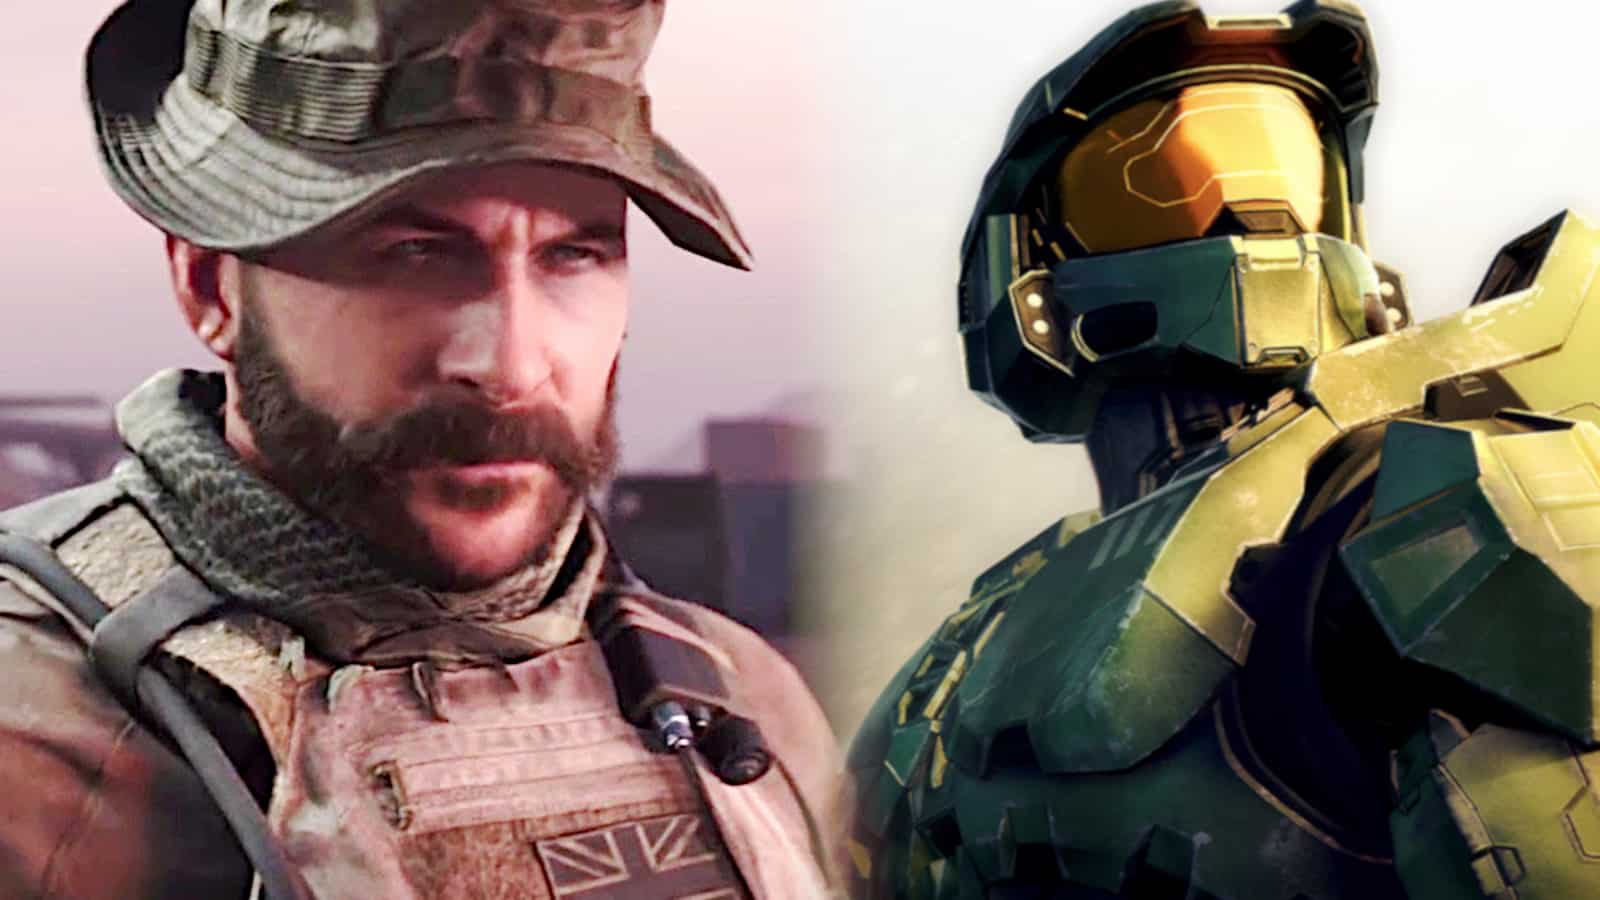 call of duty captain price jealous of halo infinite master chief